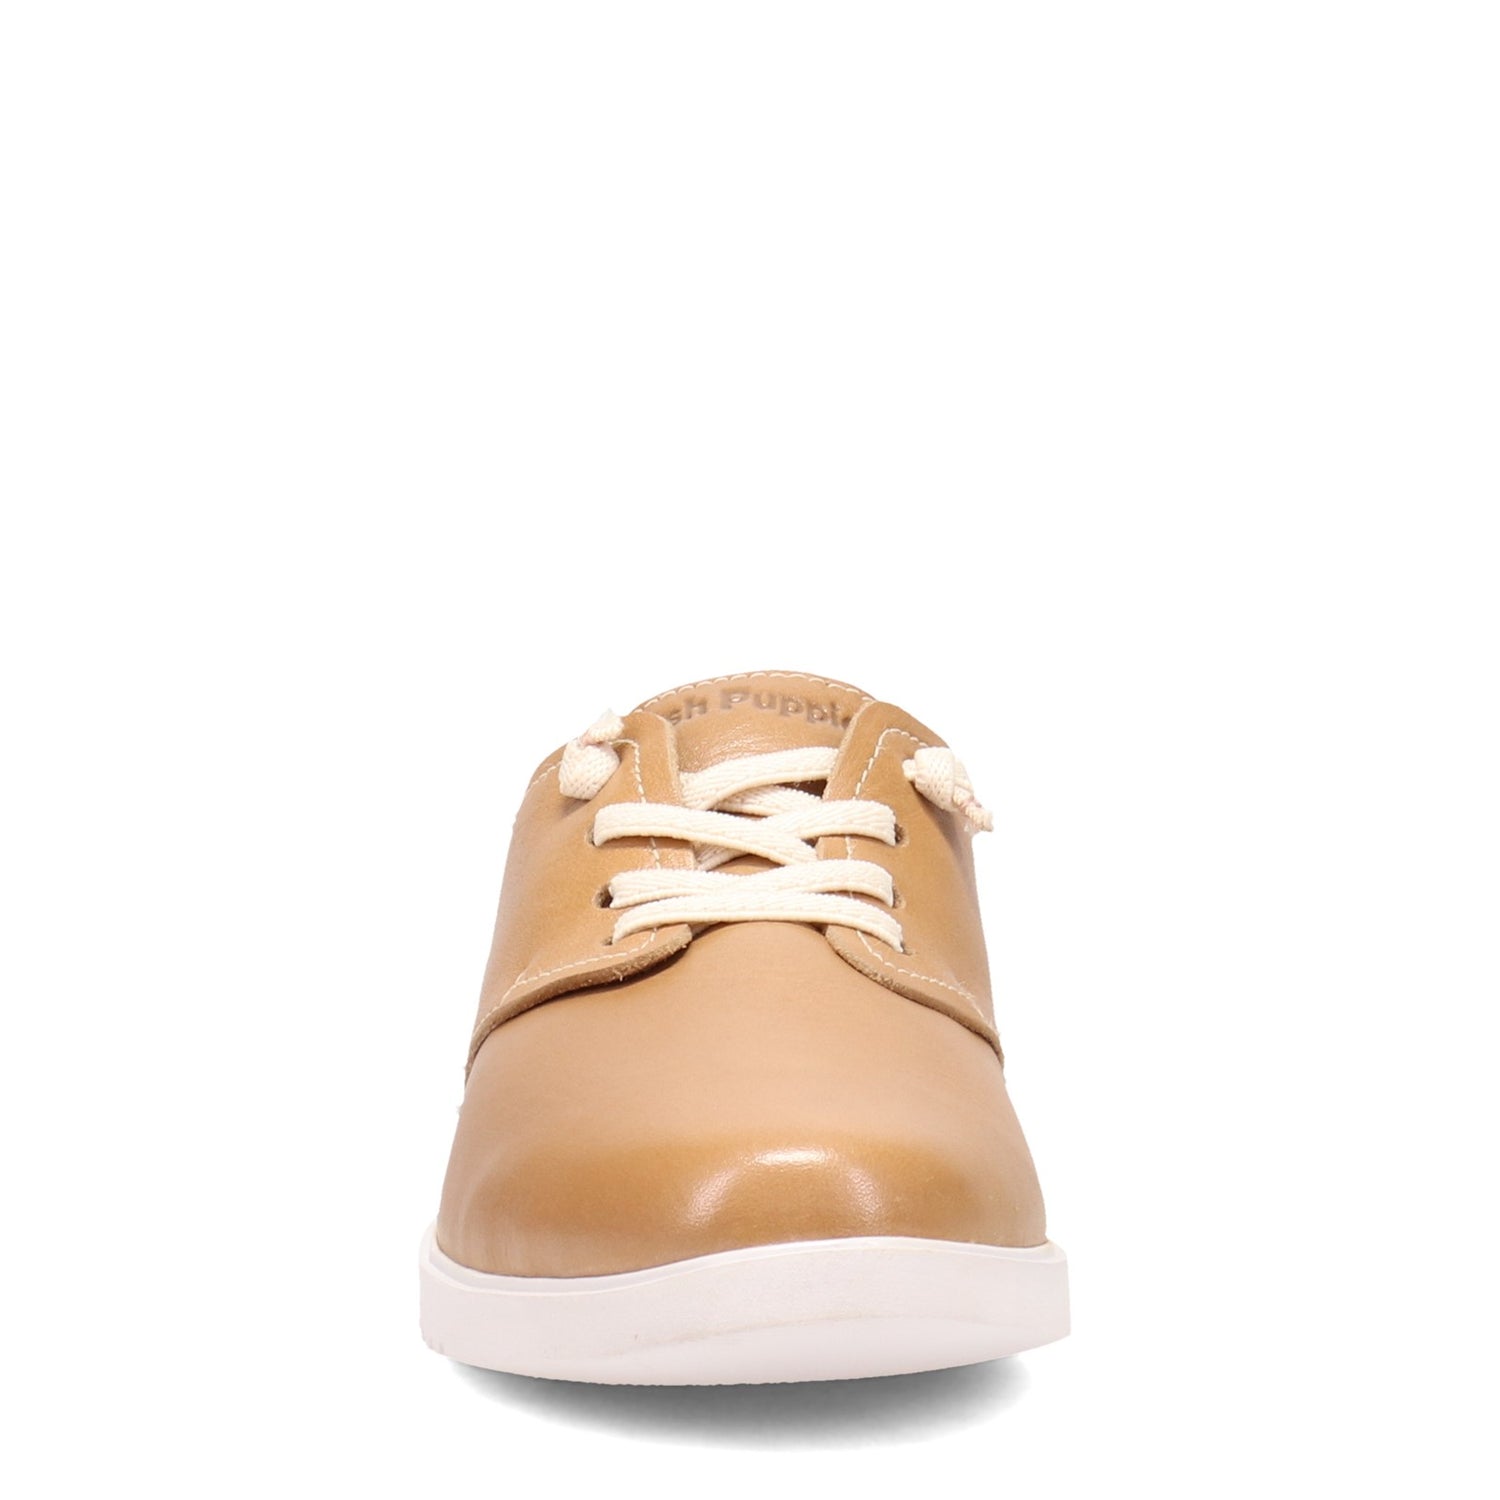 Peltz Shoes  Women's Hush Puppies The Everyday Lace-Up TAN HW06751-236